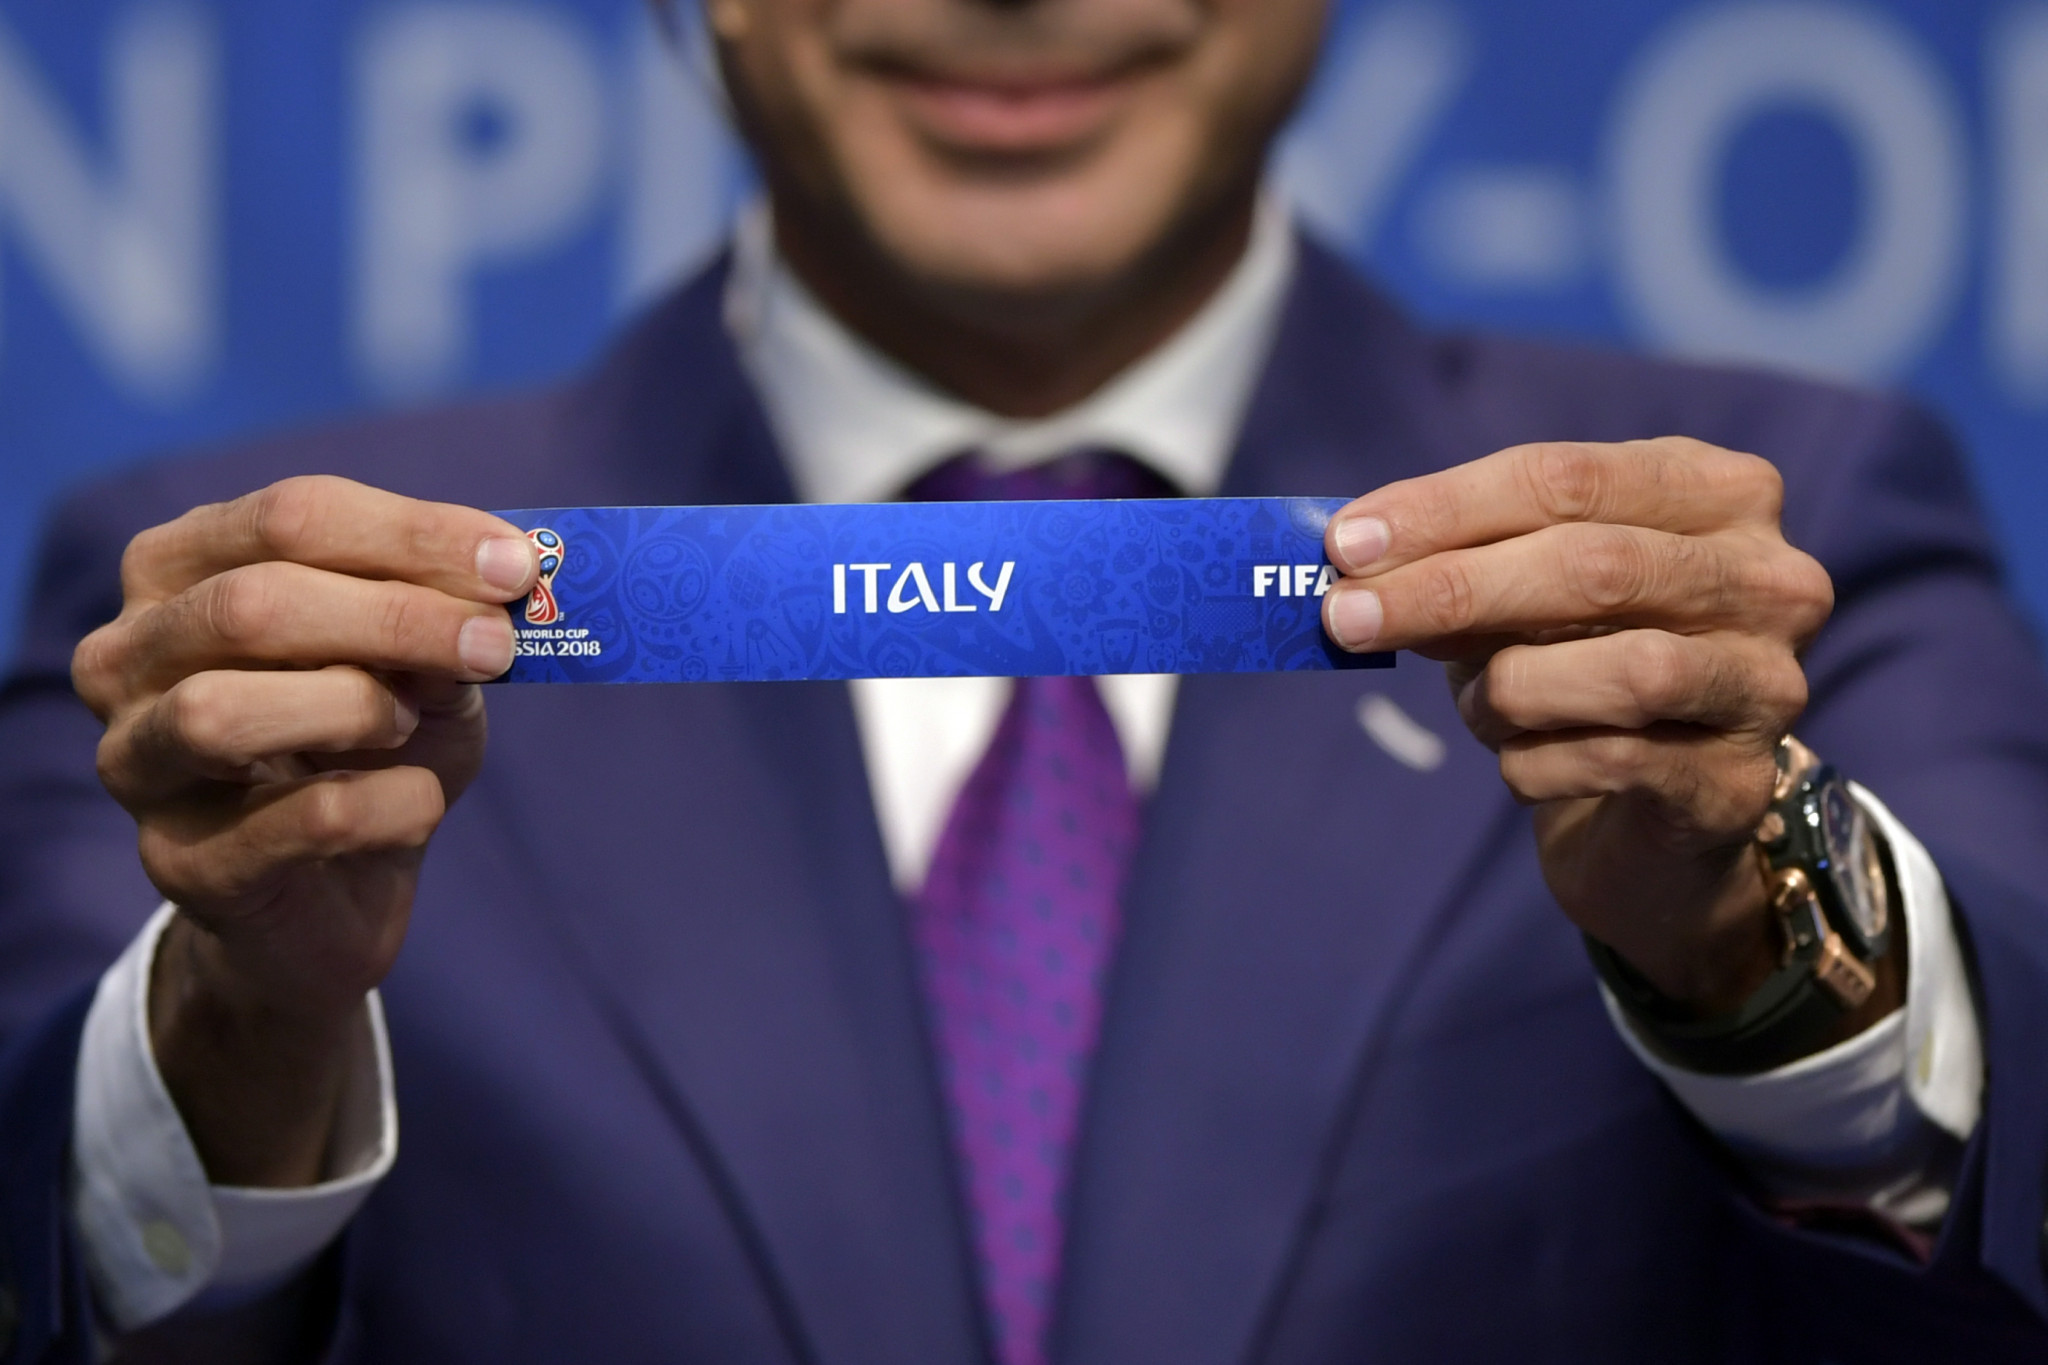 Former champions Italy to play Sweden for place at 2018 FIFA World Cup